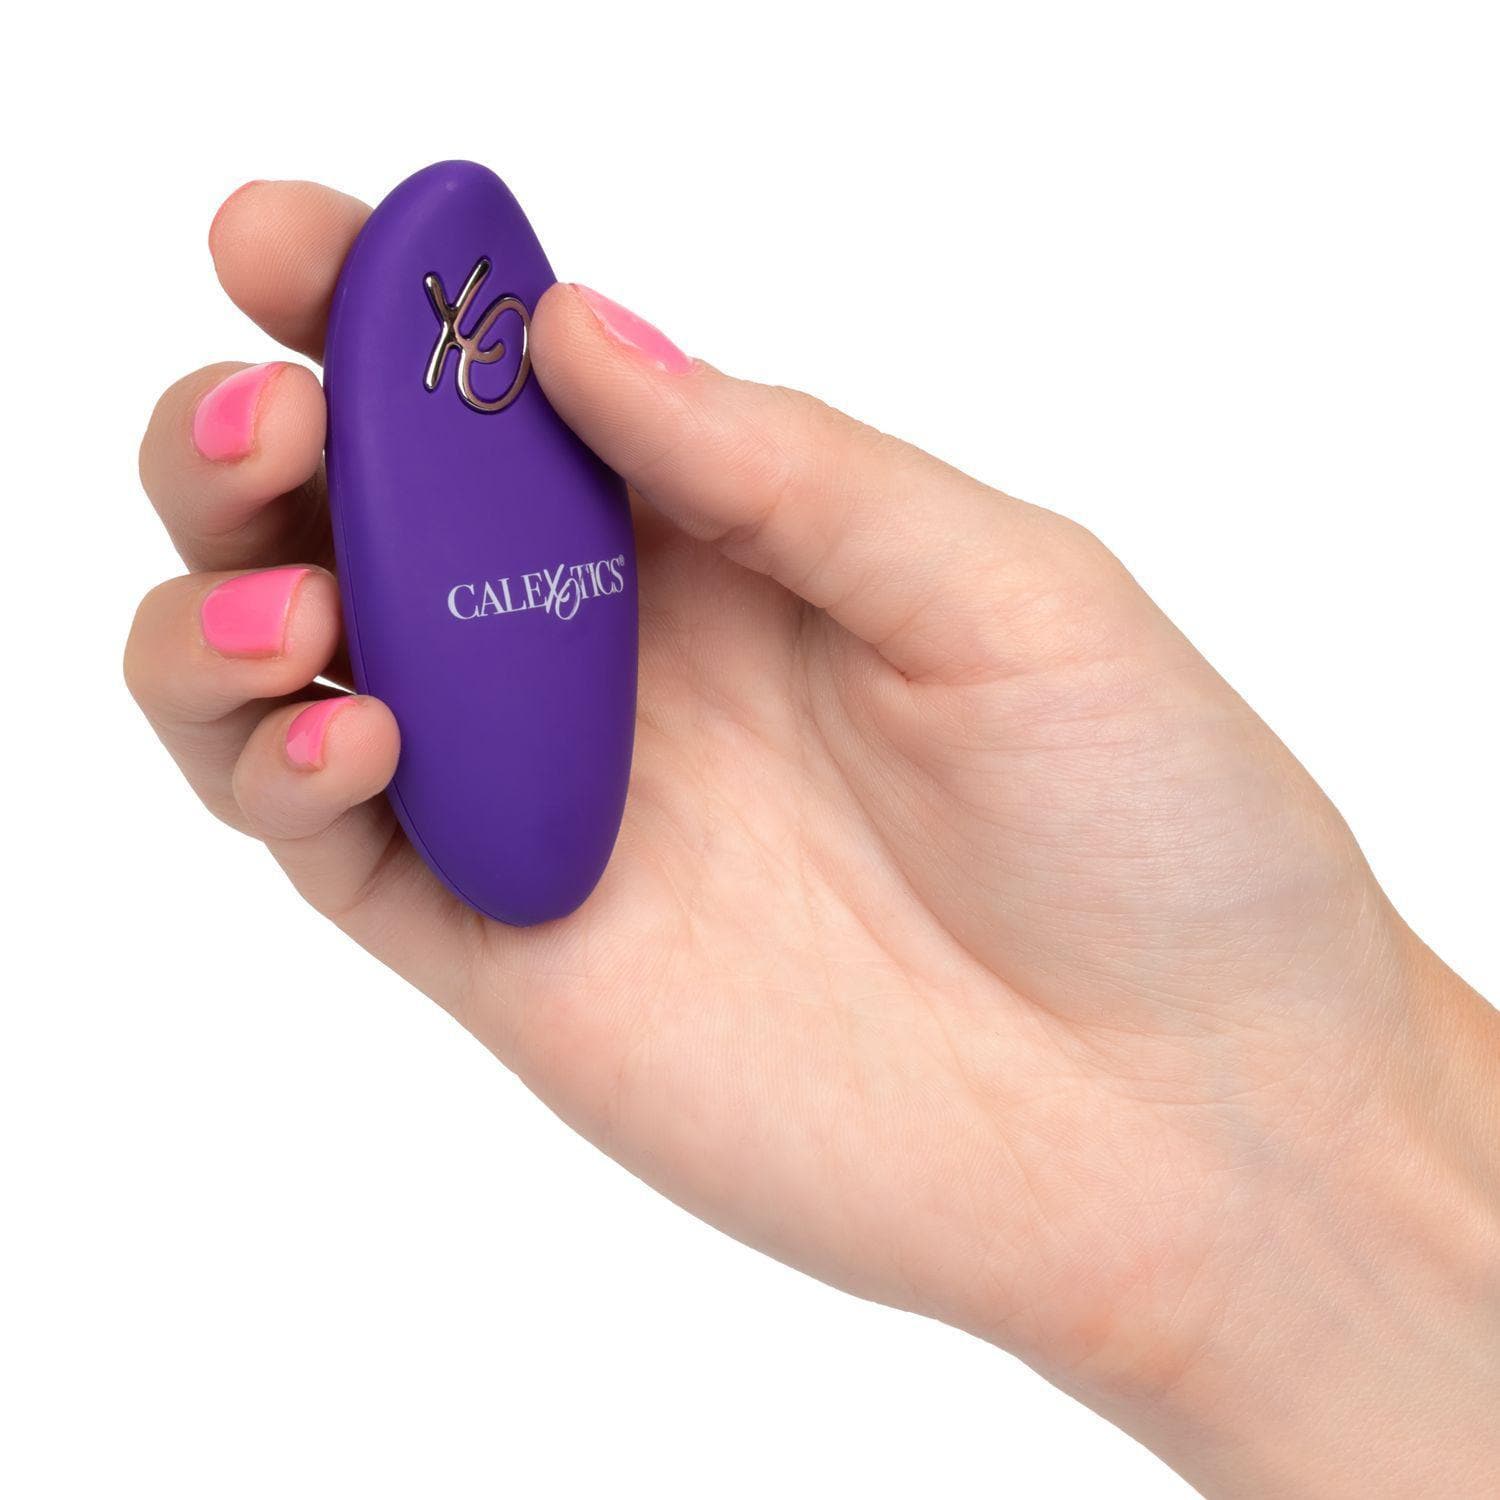 Silicone Girth Enhancer Remote Control 12 Function Vibrating Couples Orgasm Ring - Romantic Blessings